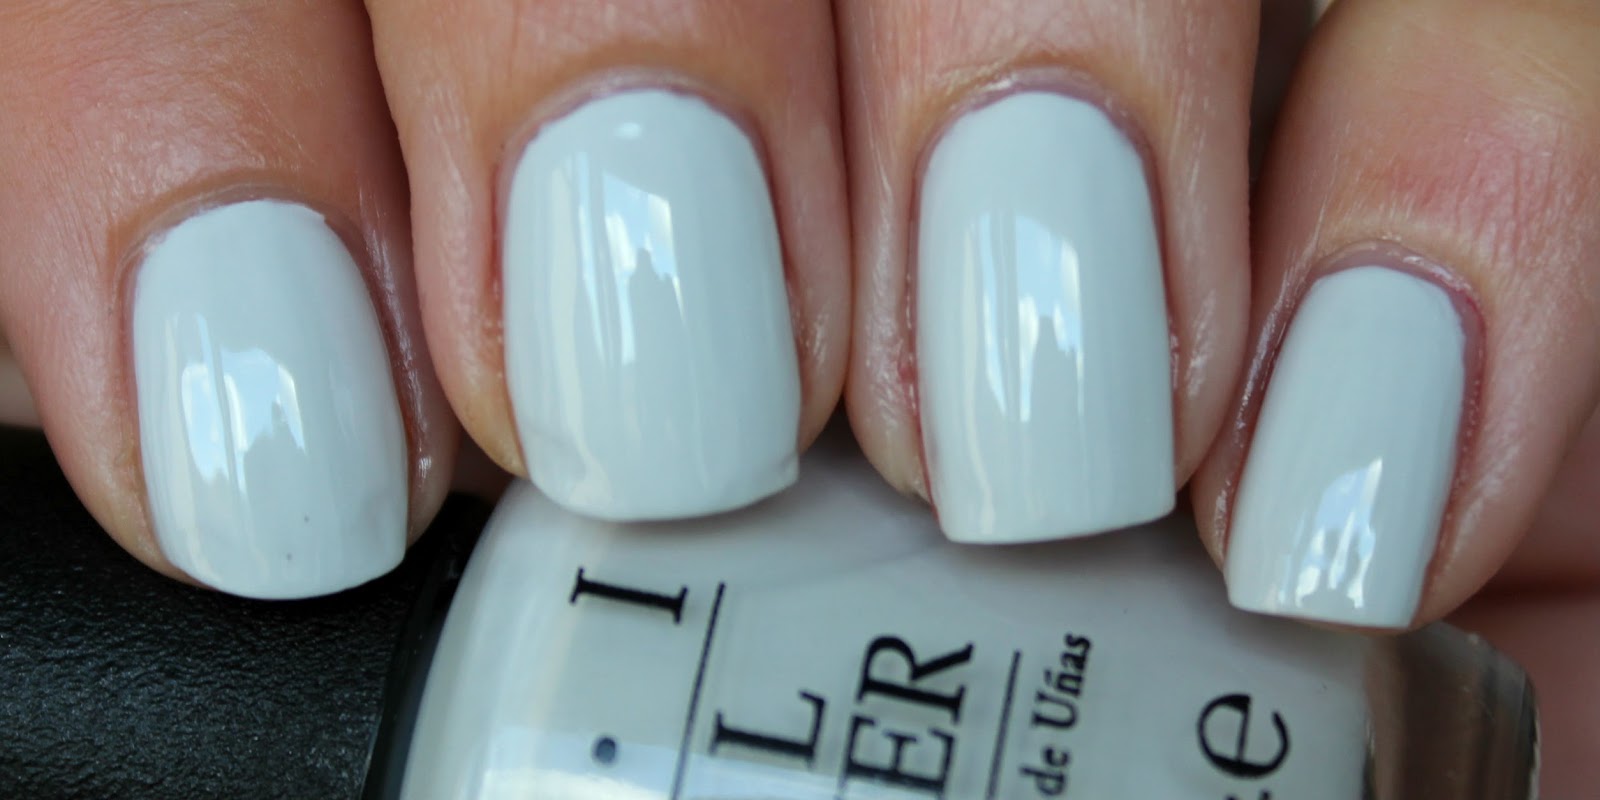 6. OPI Nail Lacquer in "I Cannoli Wear OPI" - wide 8